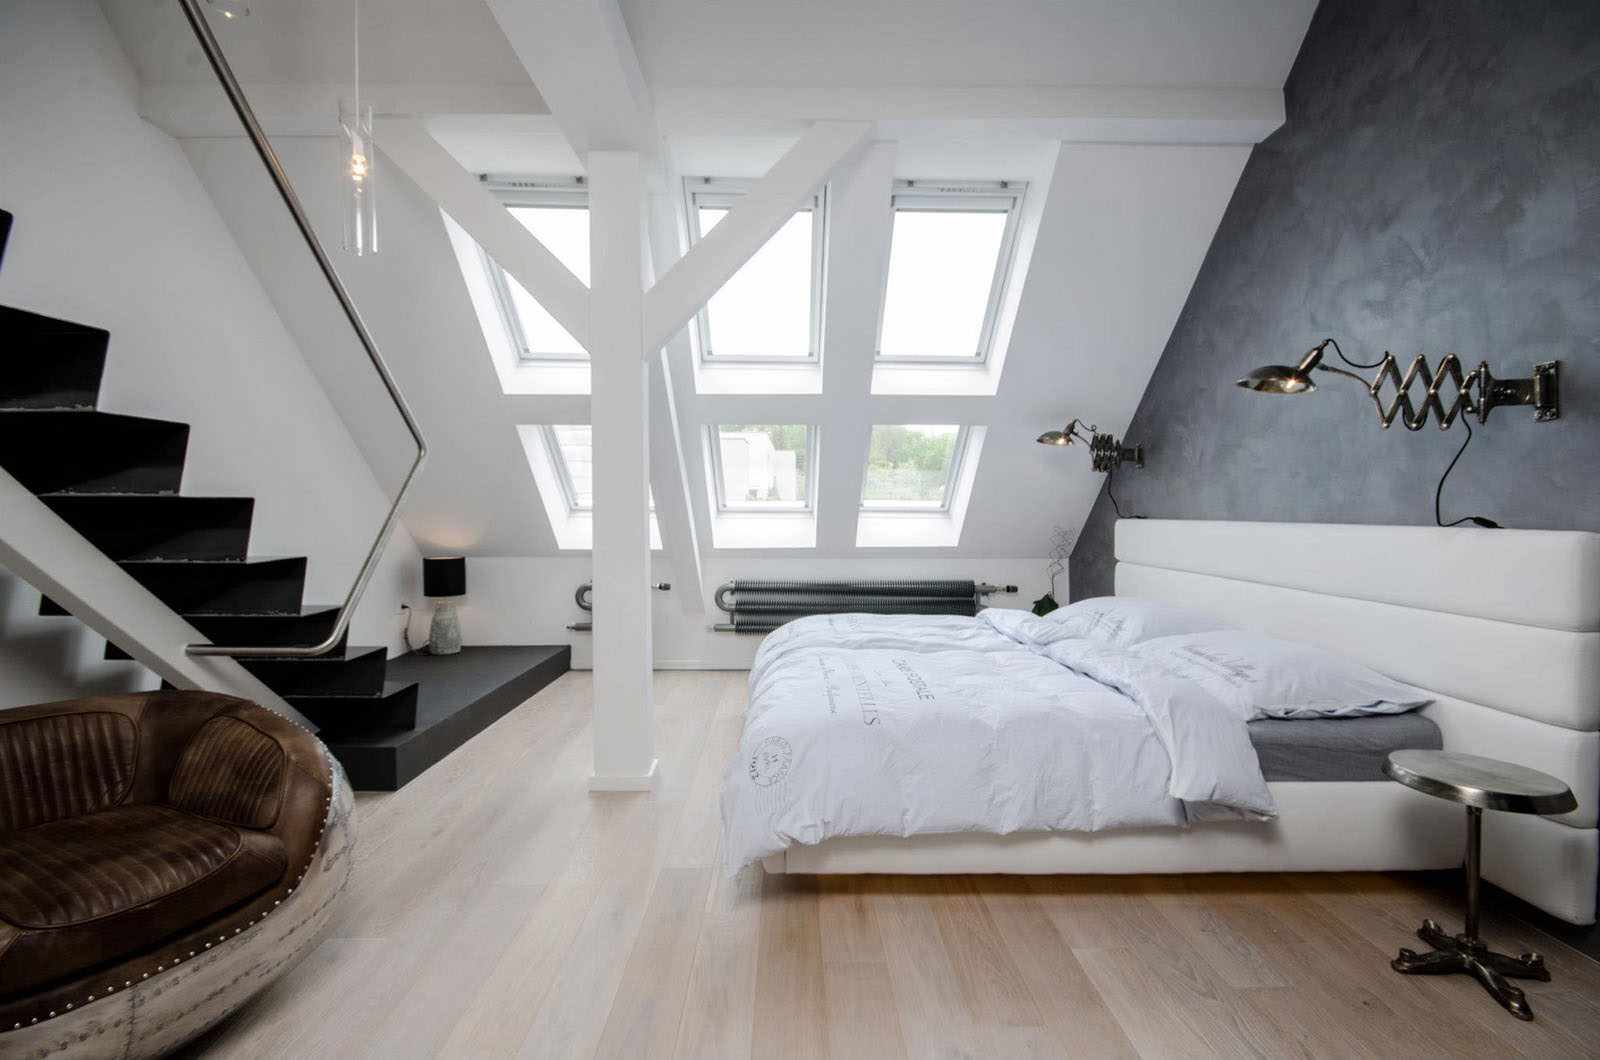 the idea of ​​an unusual style of a bedroom in the attic